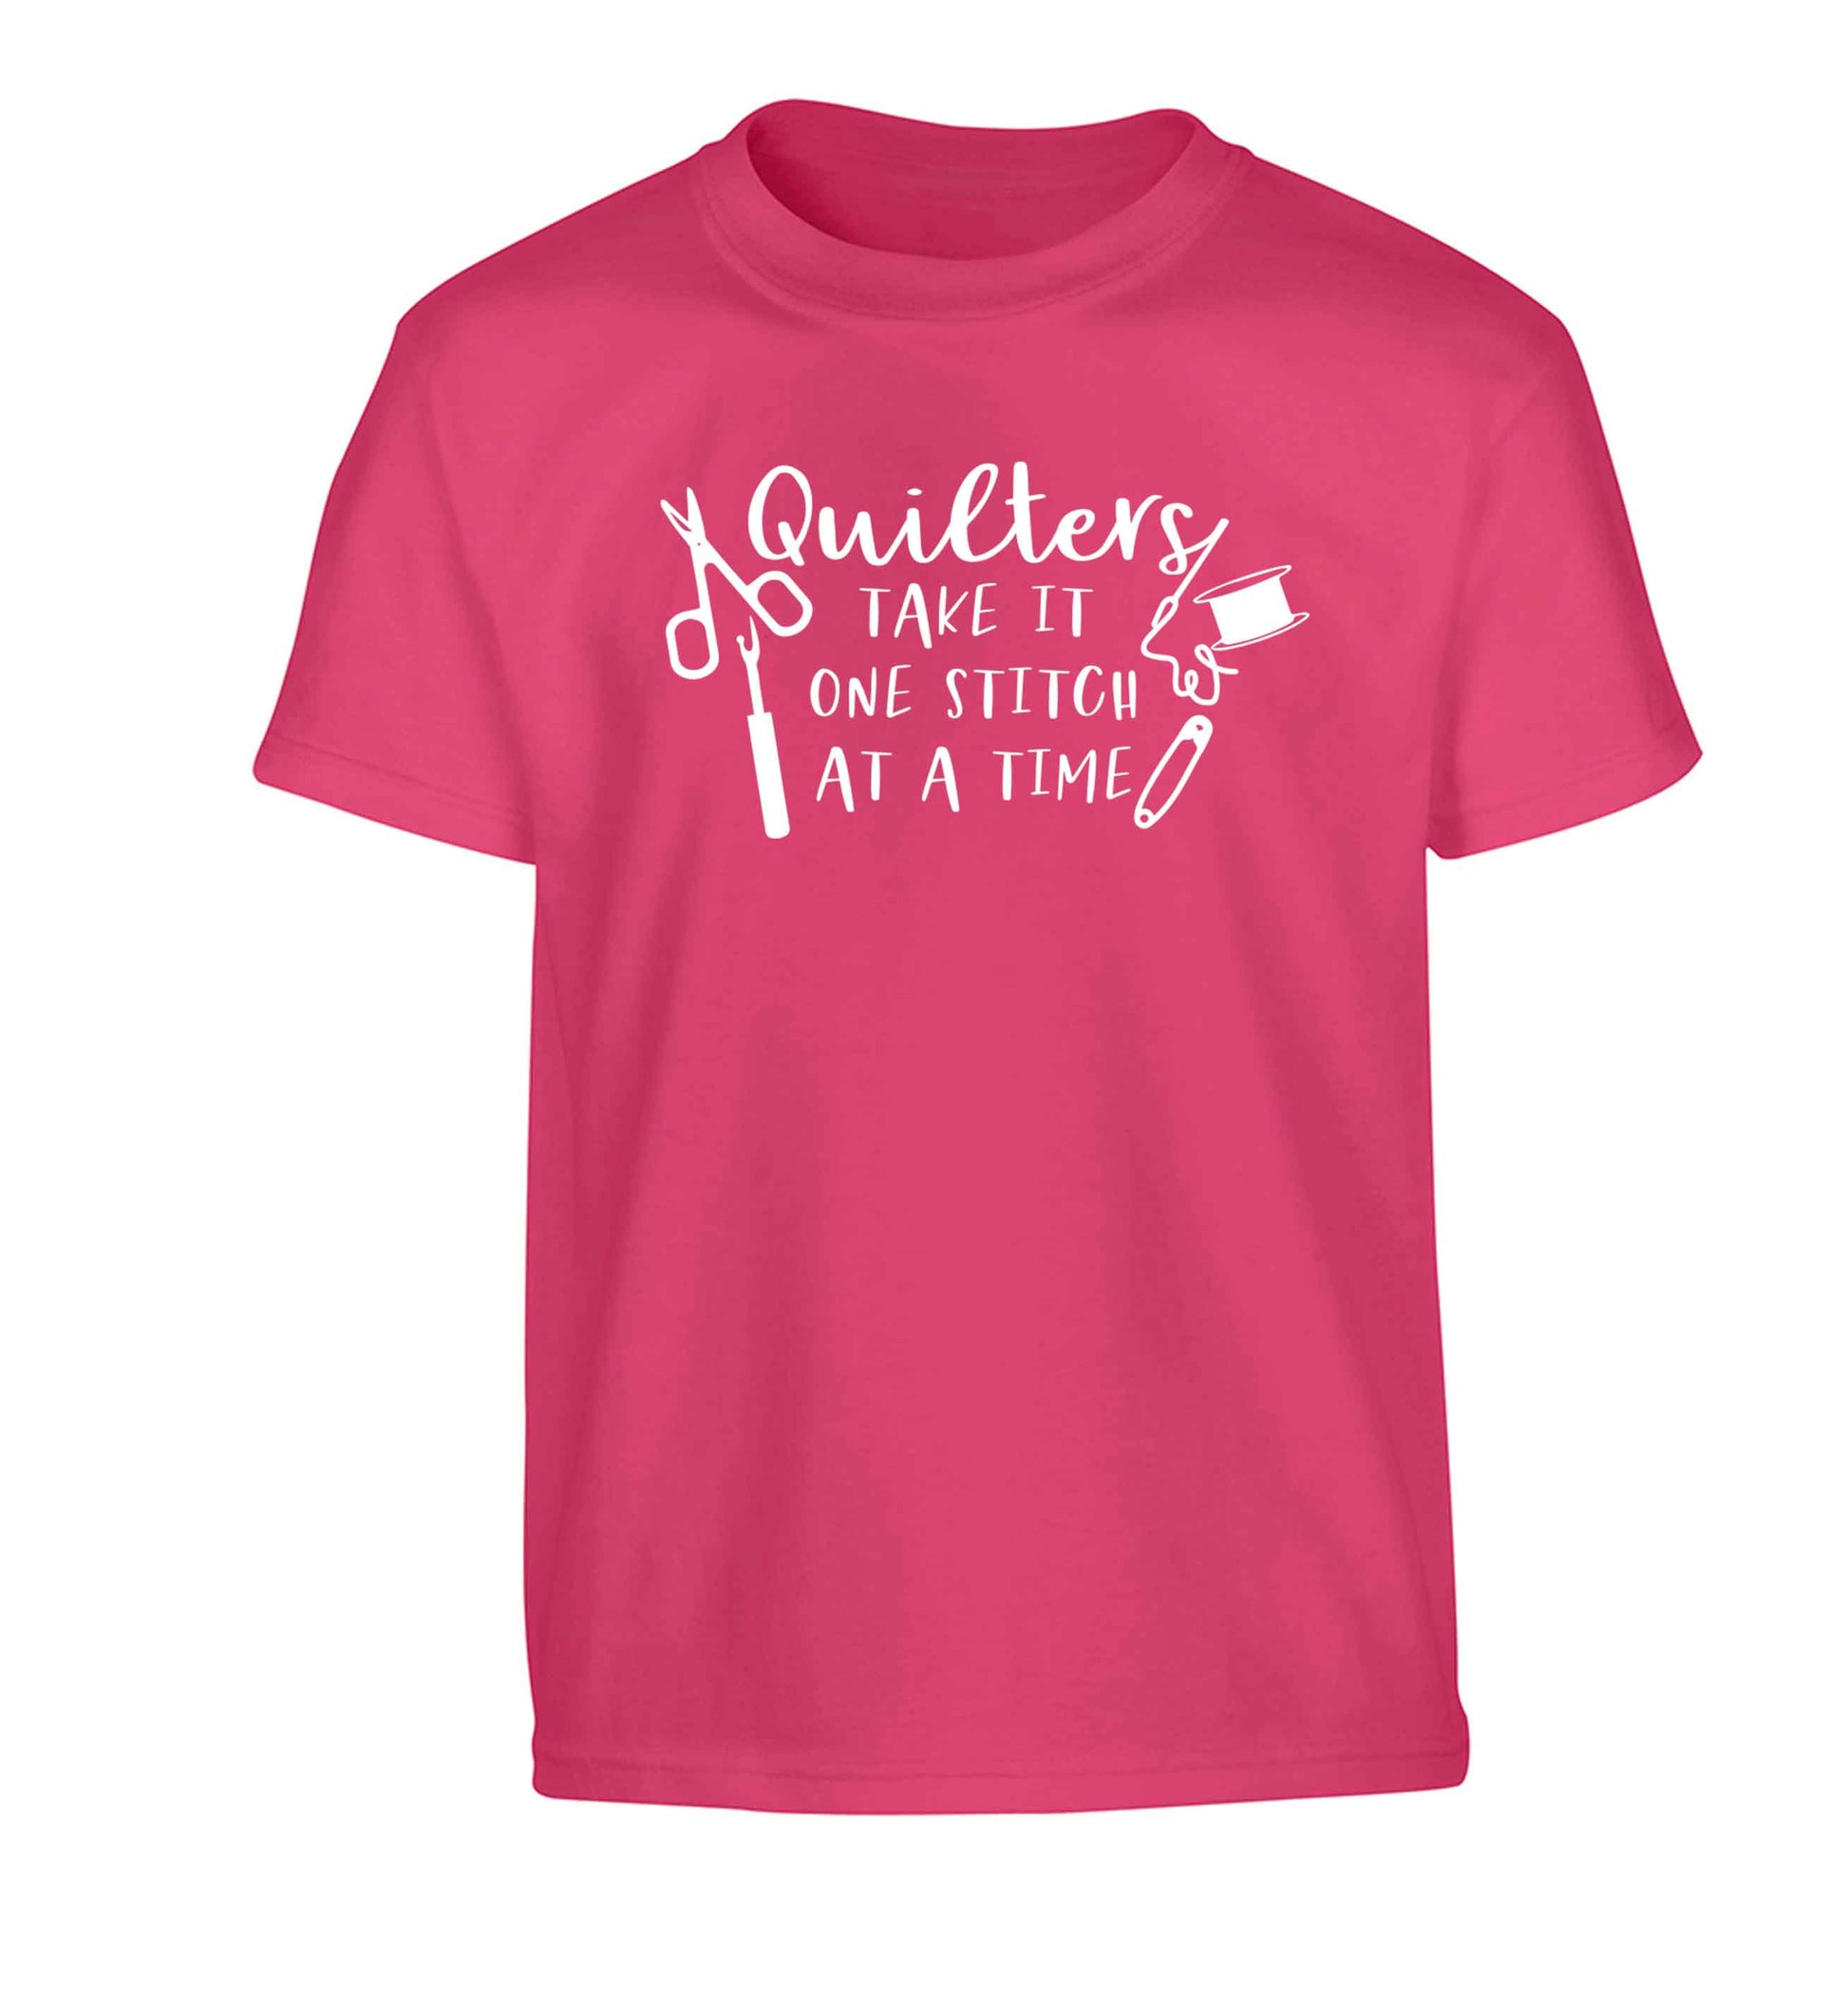 Quilters take it one stitch at a time  Children's pink Tshirt 12-13 Years